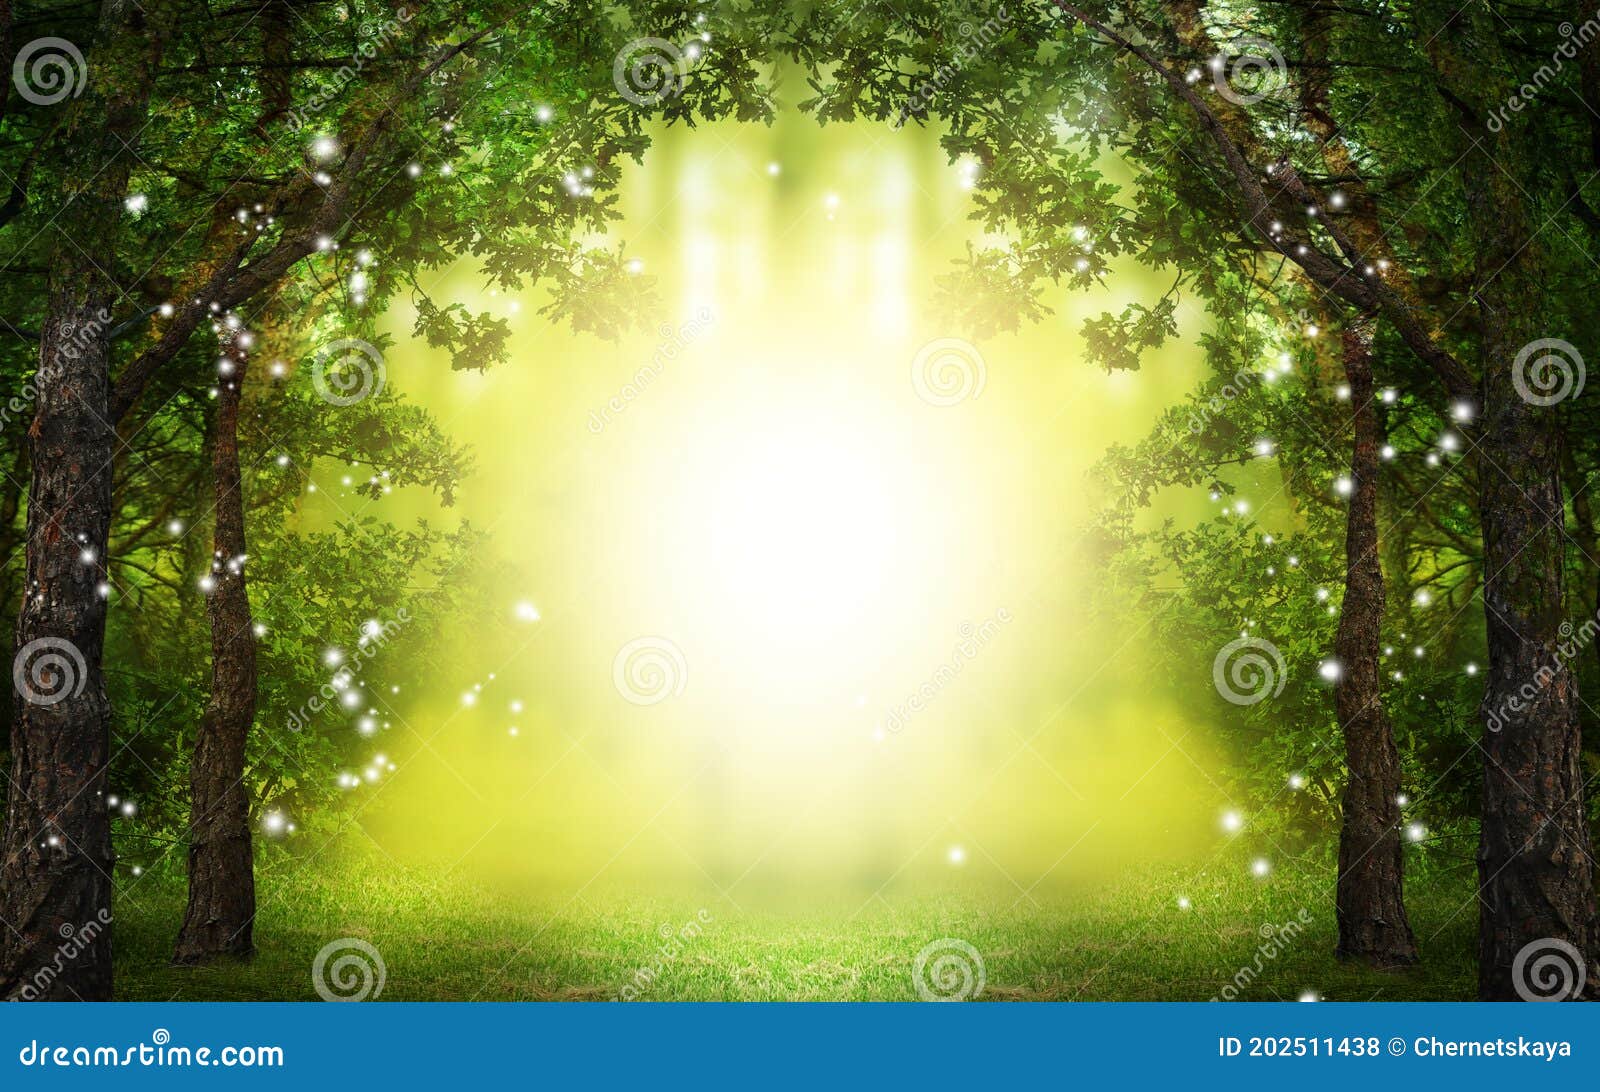 fantasy world. enchanted forest with magic lights and sunlit way between trees